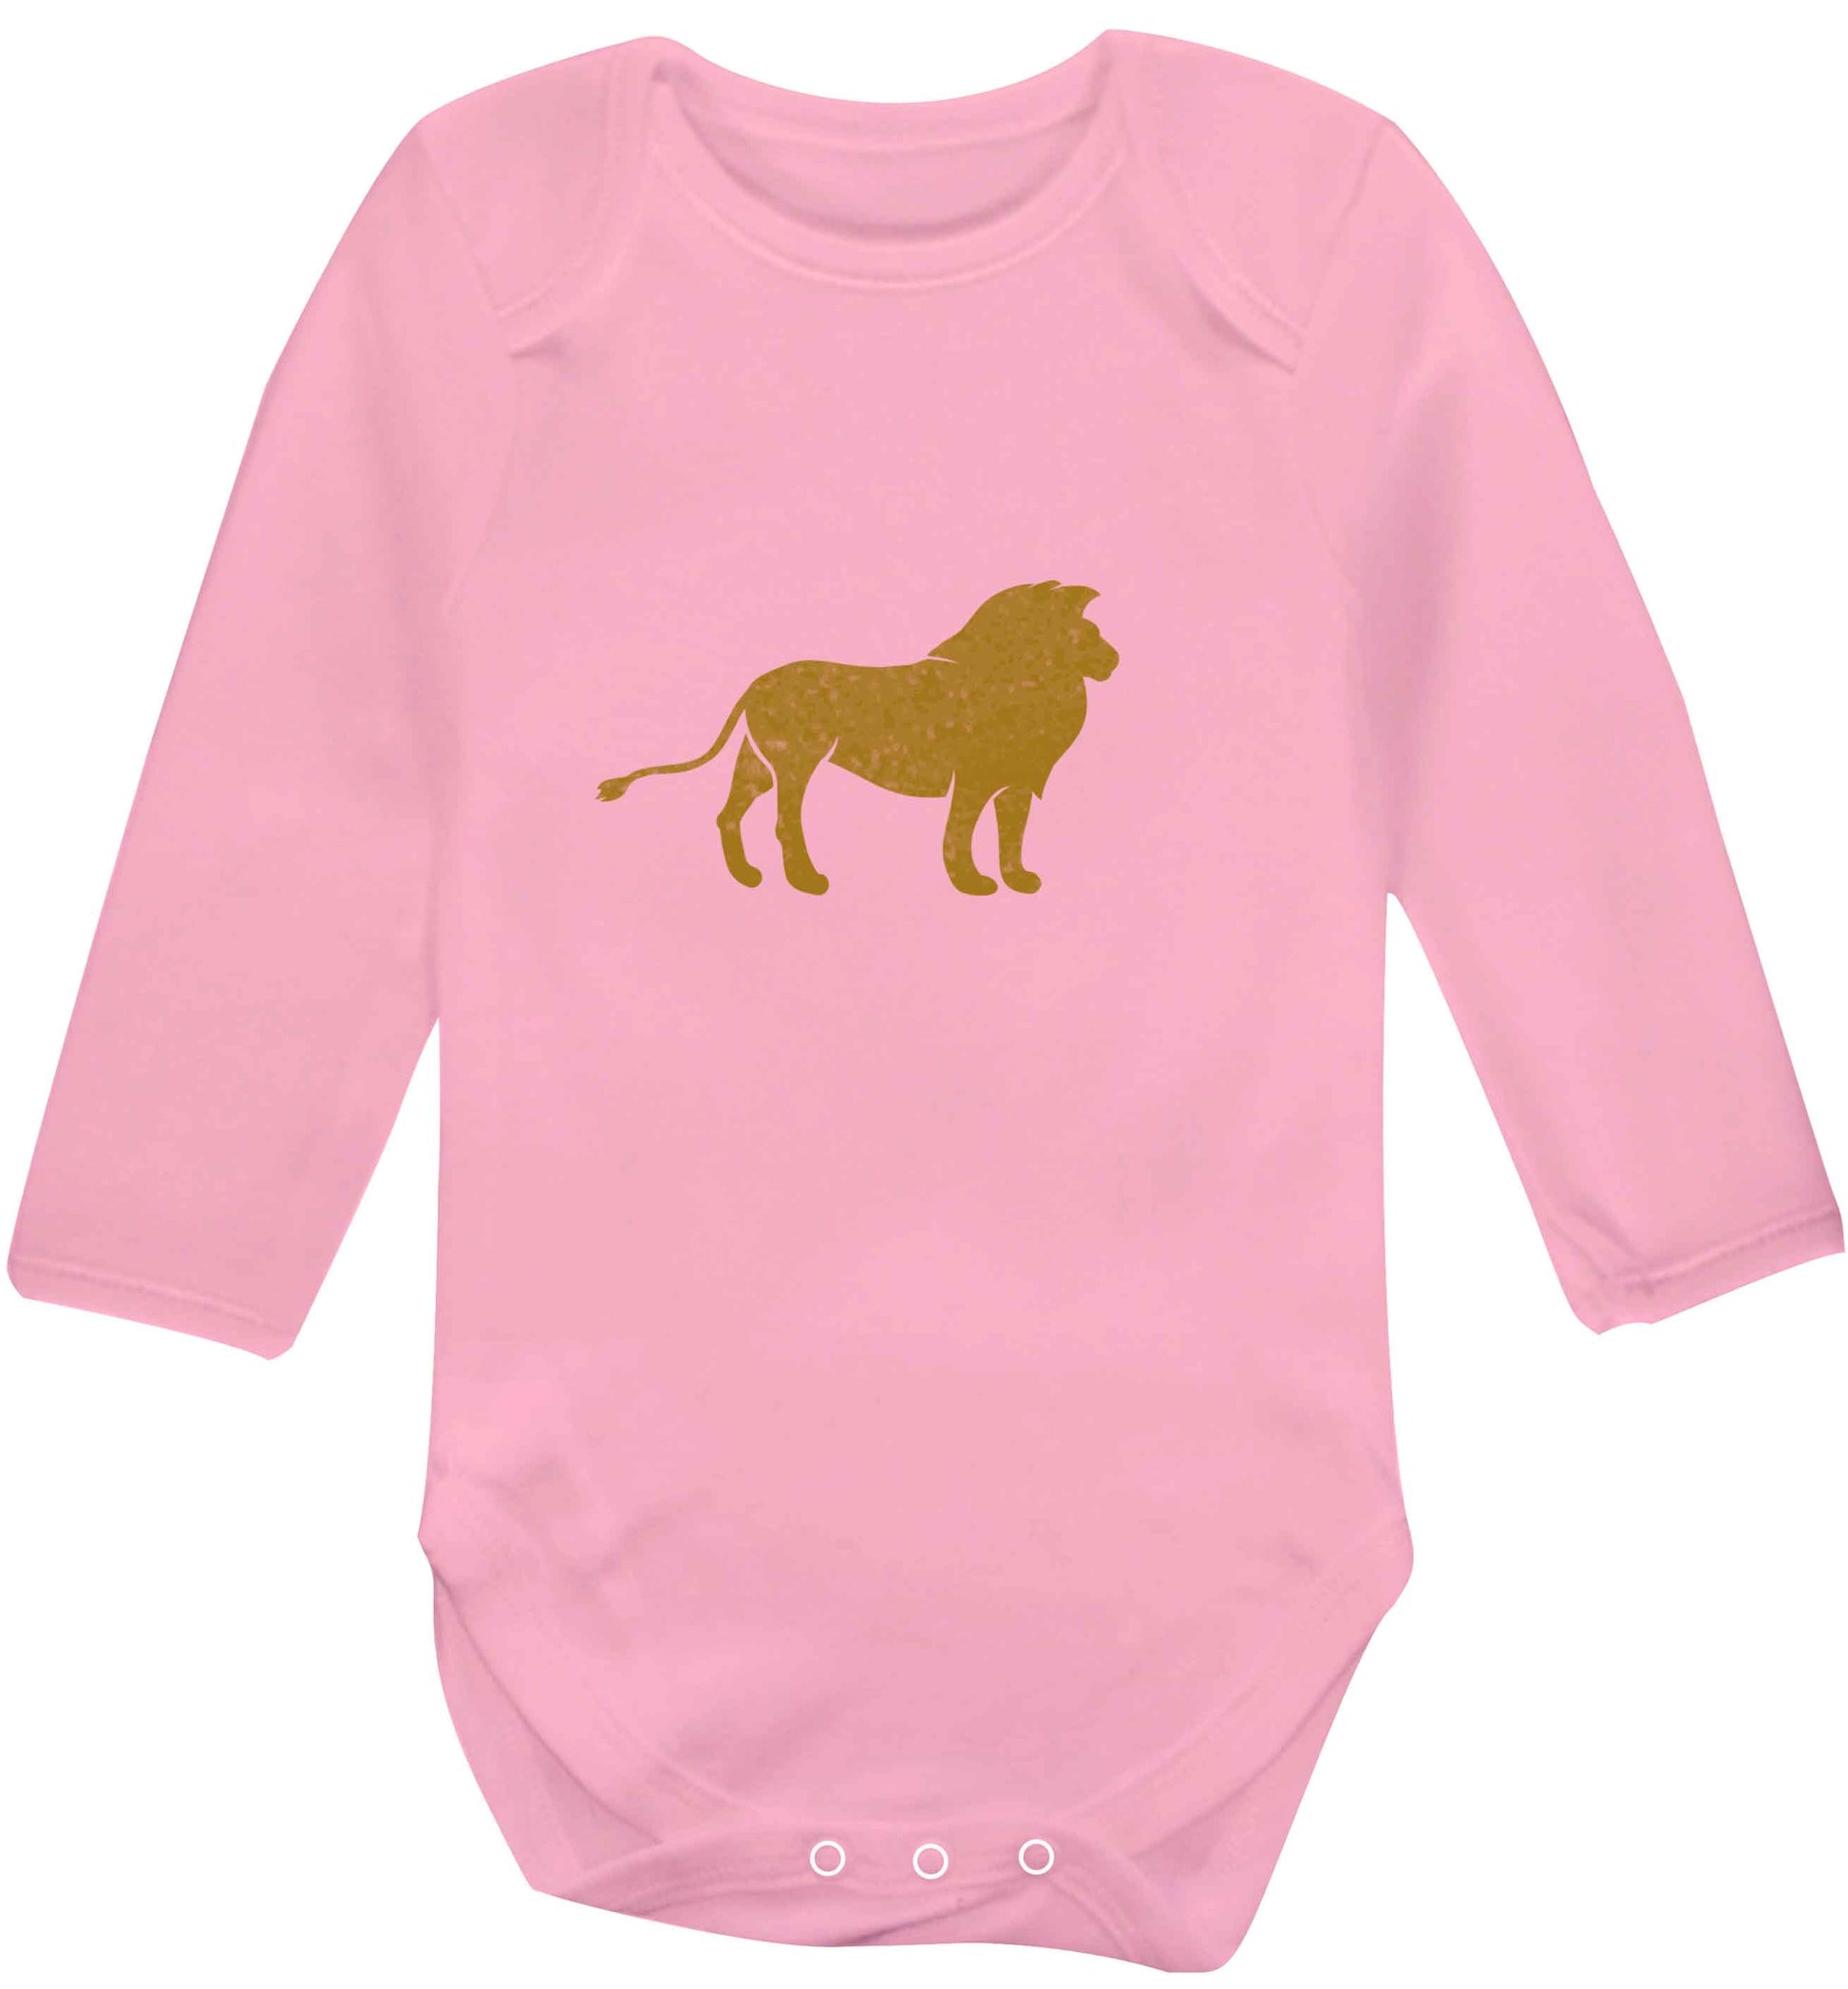 Gold lion baby vest long sleeved pale pink 6-12 months